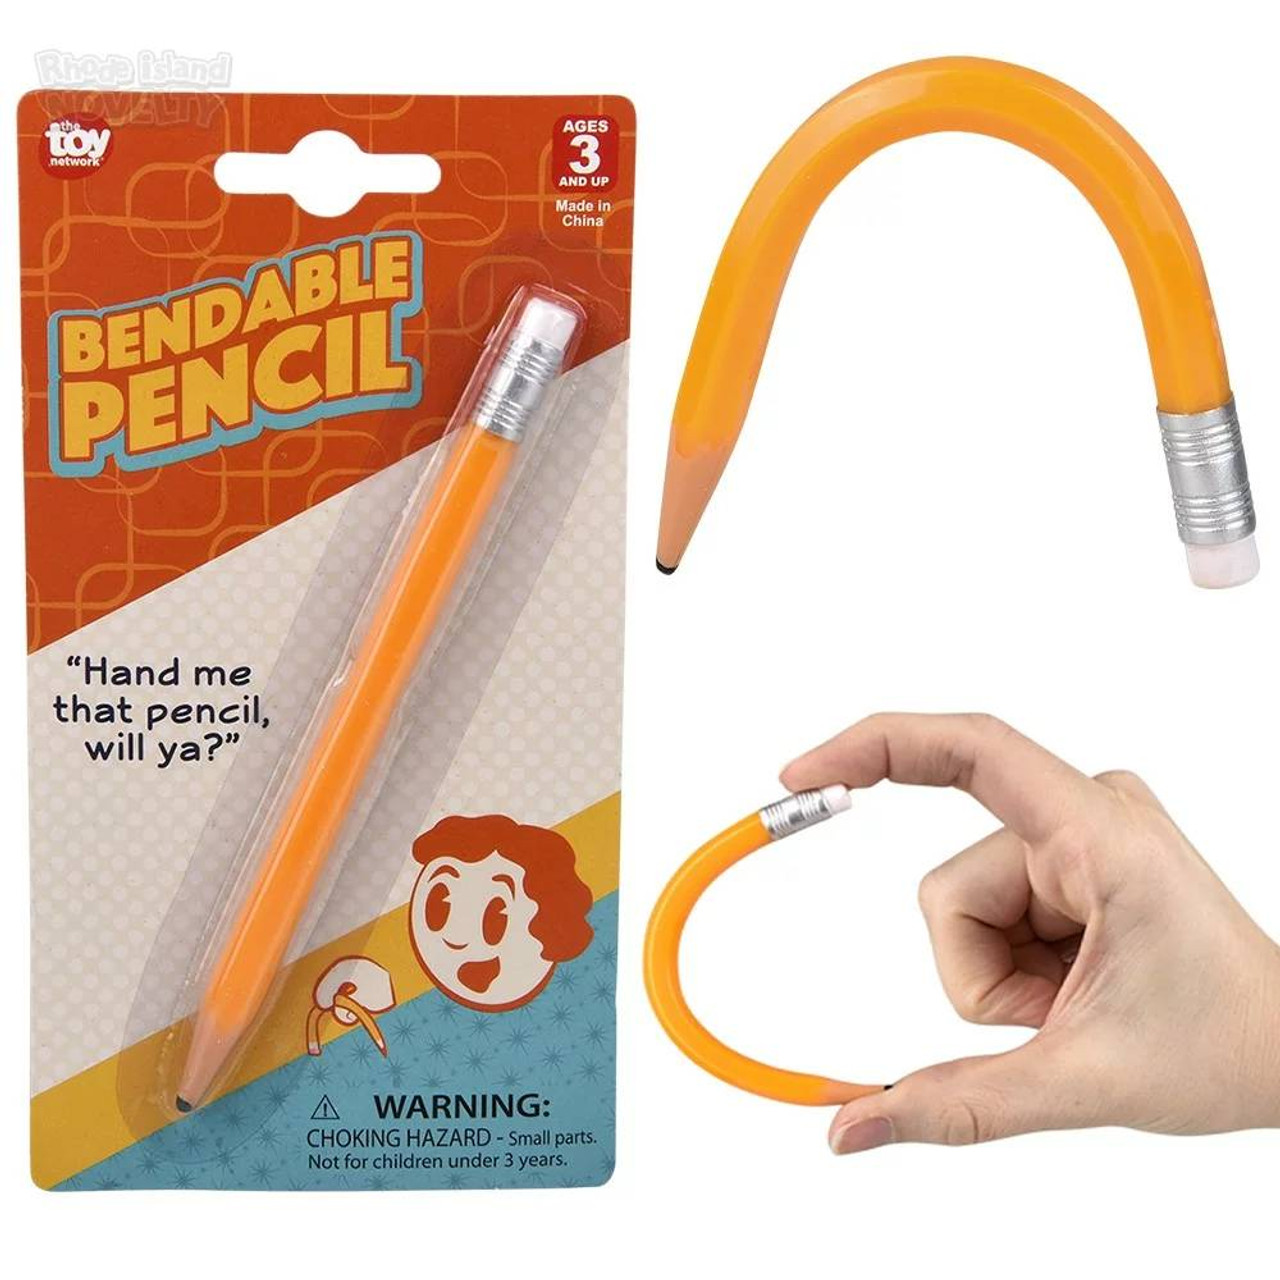 Bendable Pencil by Trainers Warehouse